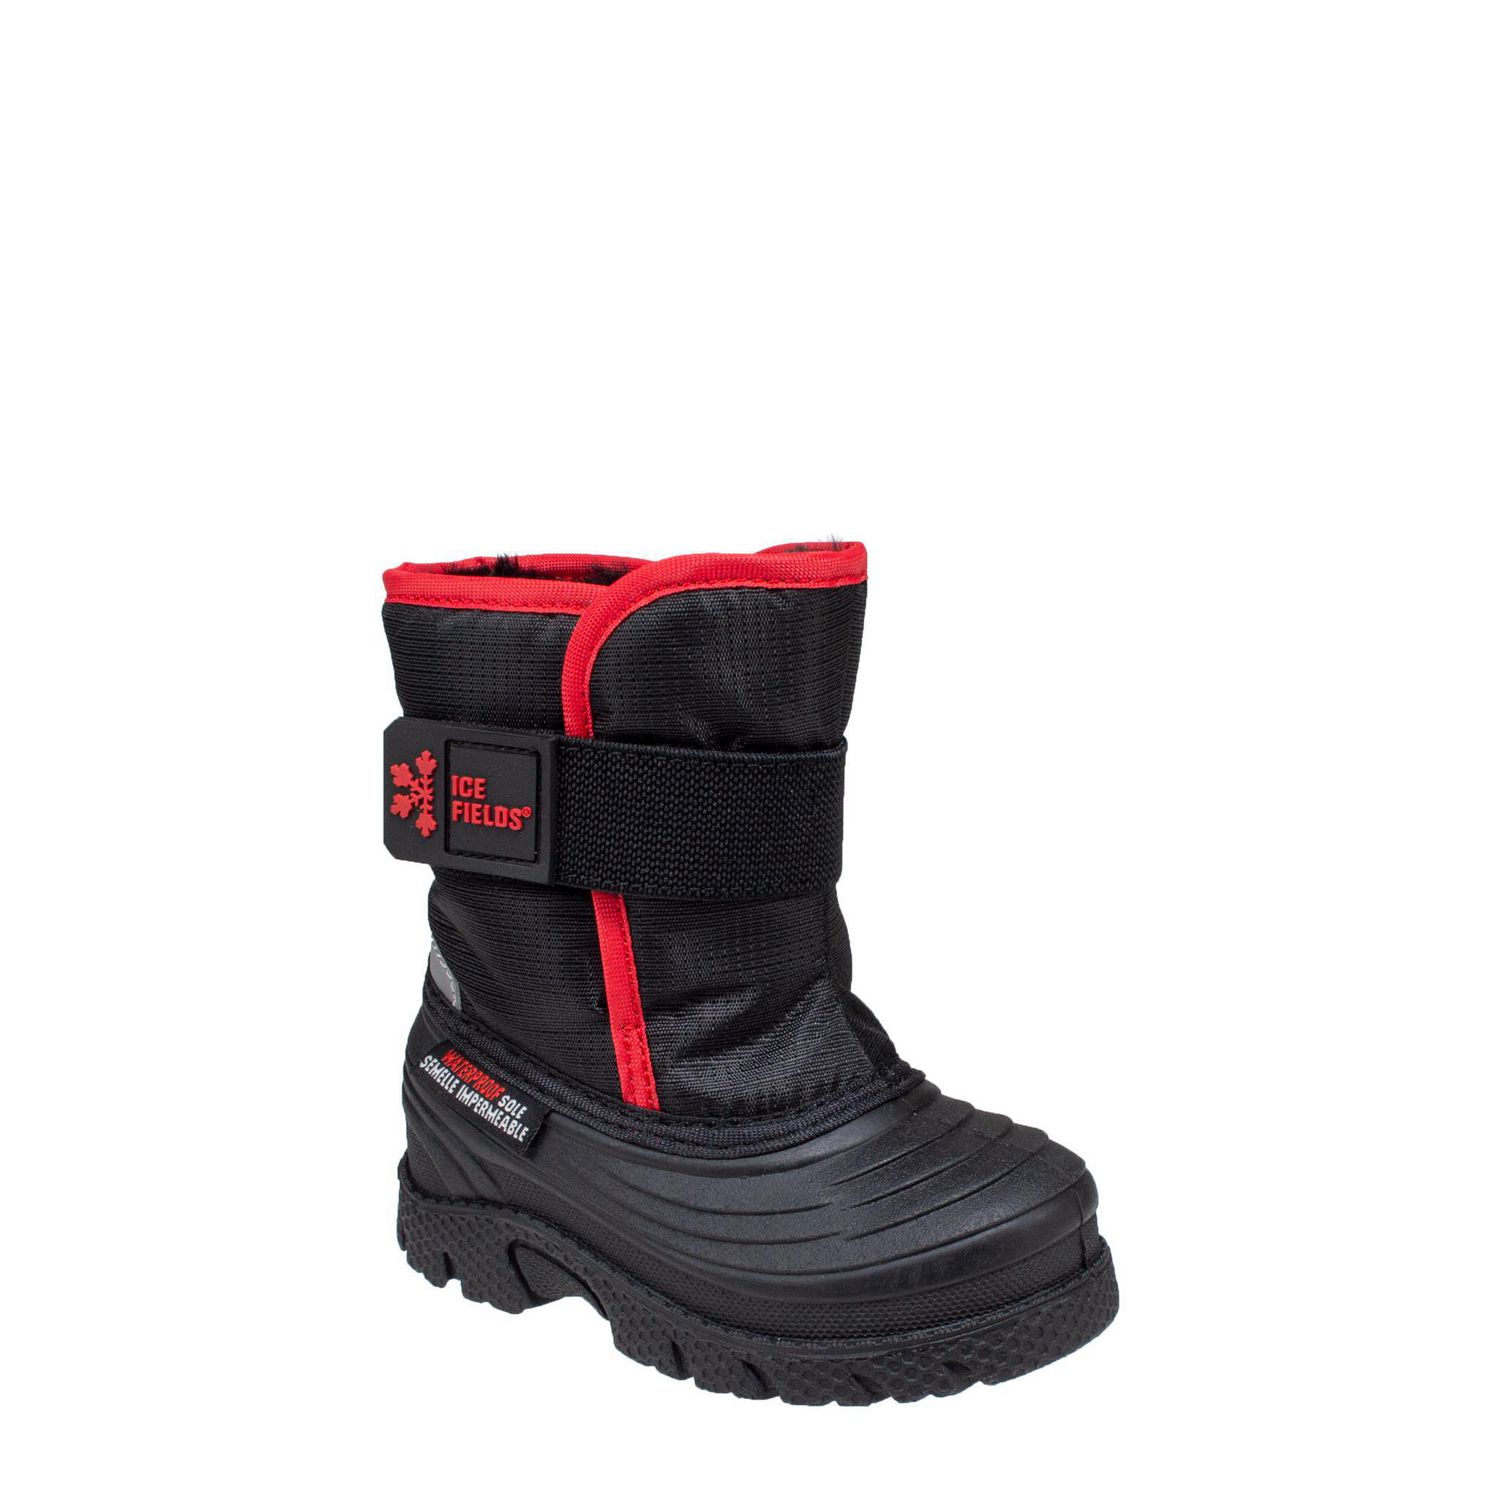 Ice Fields Toddler Boys' Comet Boots | Walmart Canada